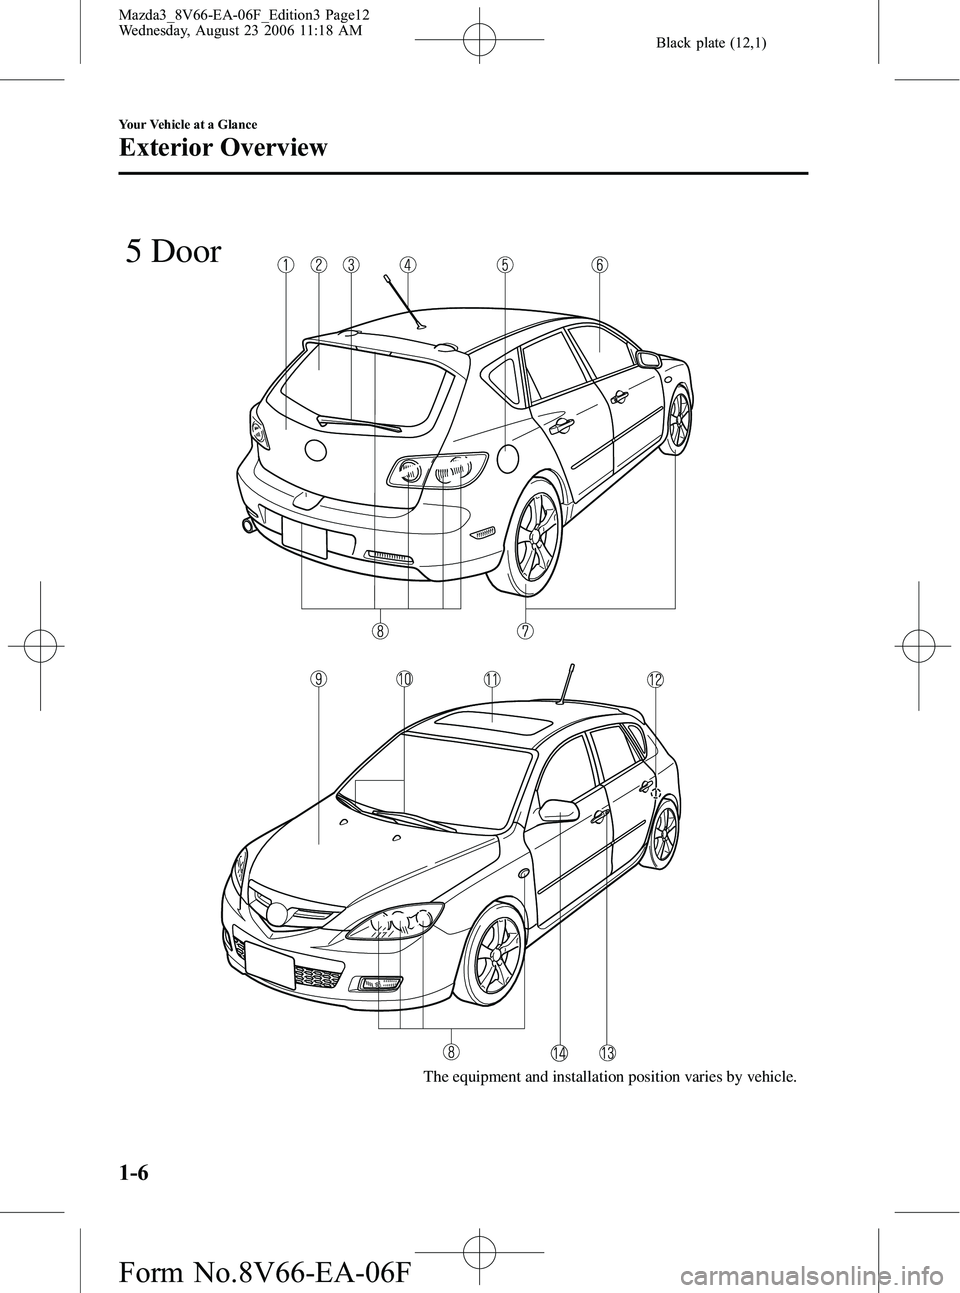 MAZDA MODEL 3 5-DOOR 2007 User Guide Black plate (12,1)
The equipment and installation position varies by vehicle.
5 Door
1-6
Your Vehicle at a Glance
Exterior Overview
Mazda3_8V66-EA-06F_Edition3 Page12
Wednesday, August 23 2006 11:18 A